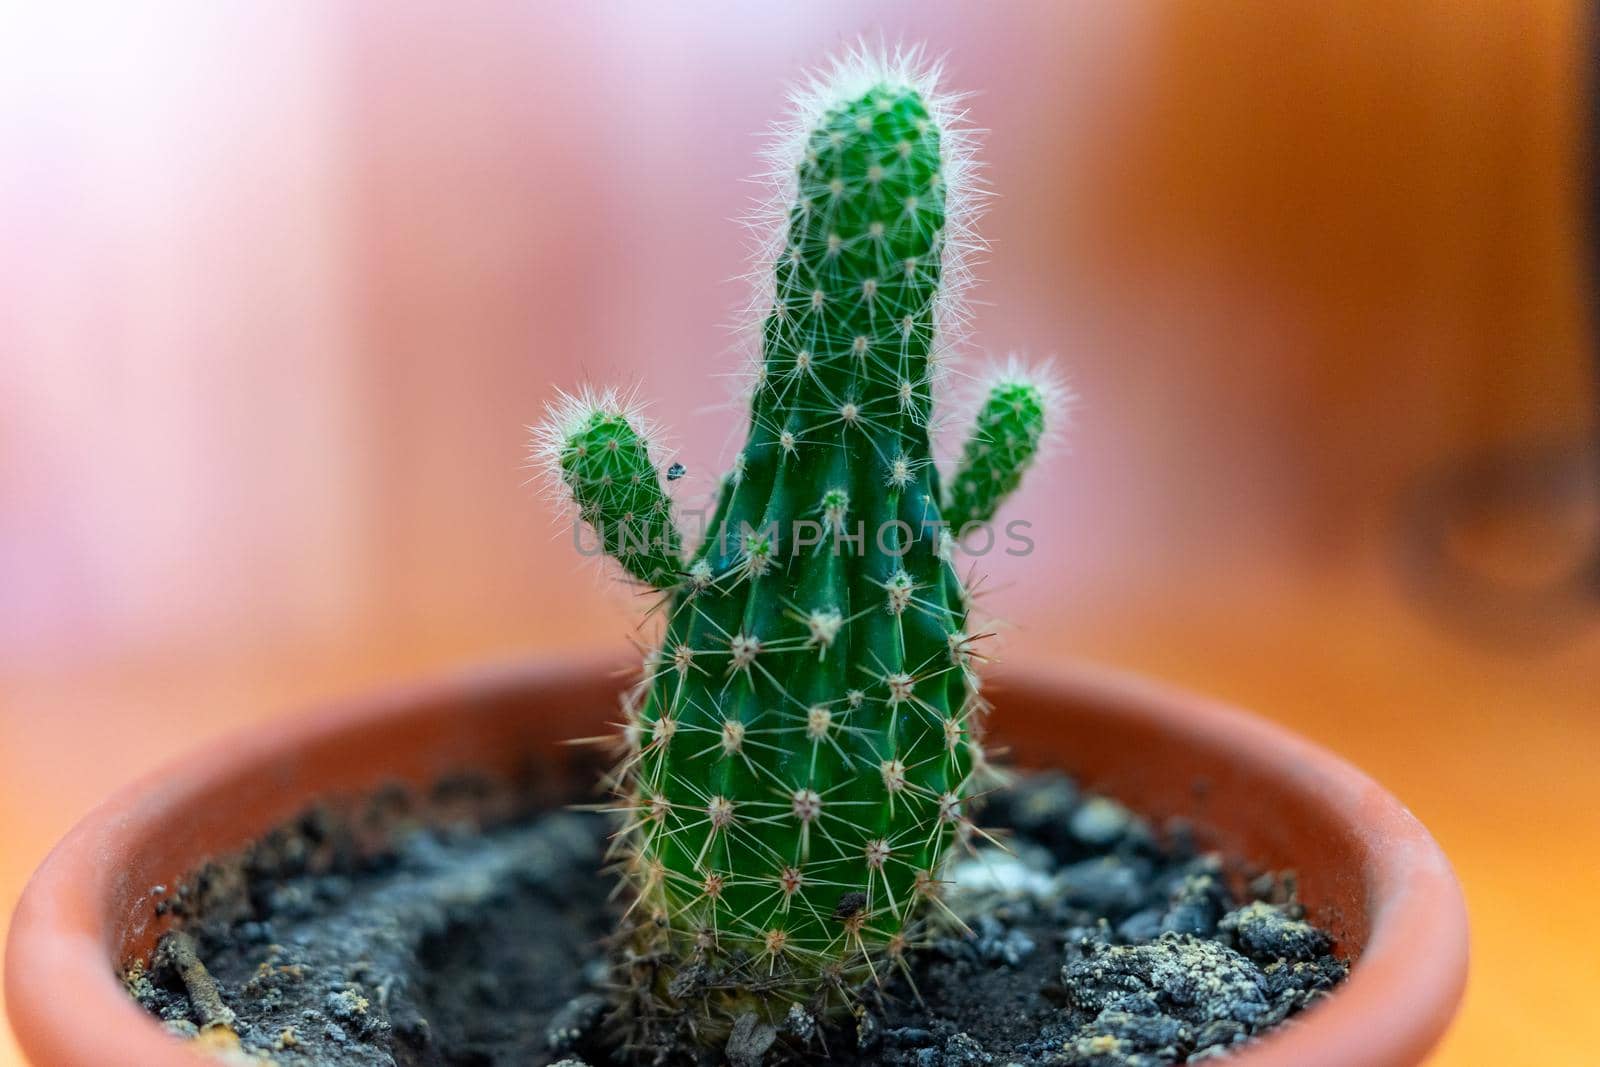 A small cactus in a brown pot looks like a person with raised arms.